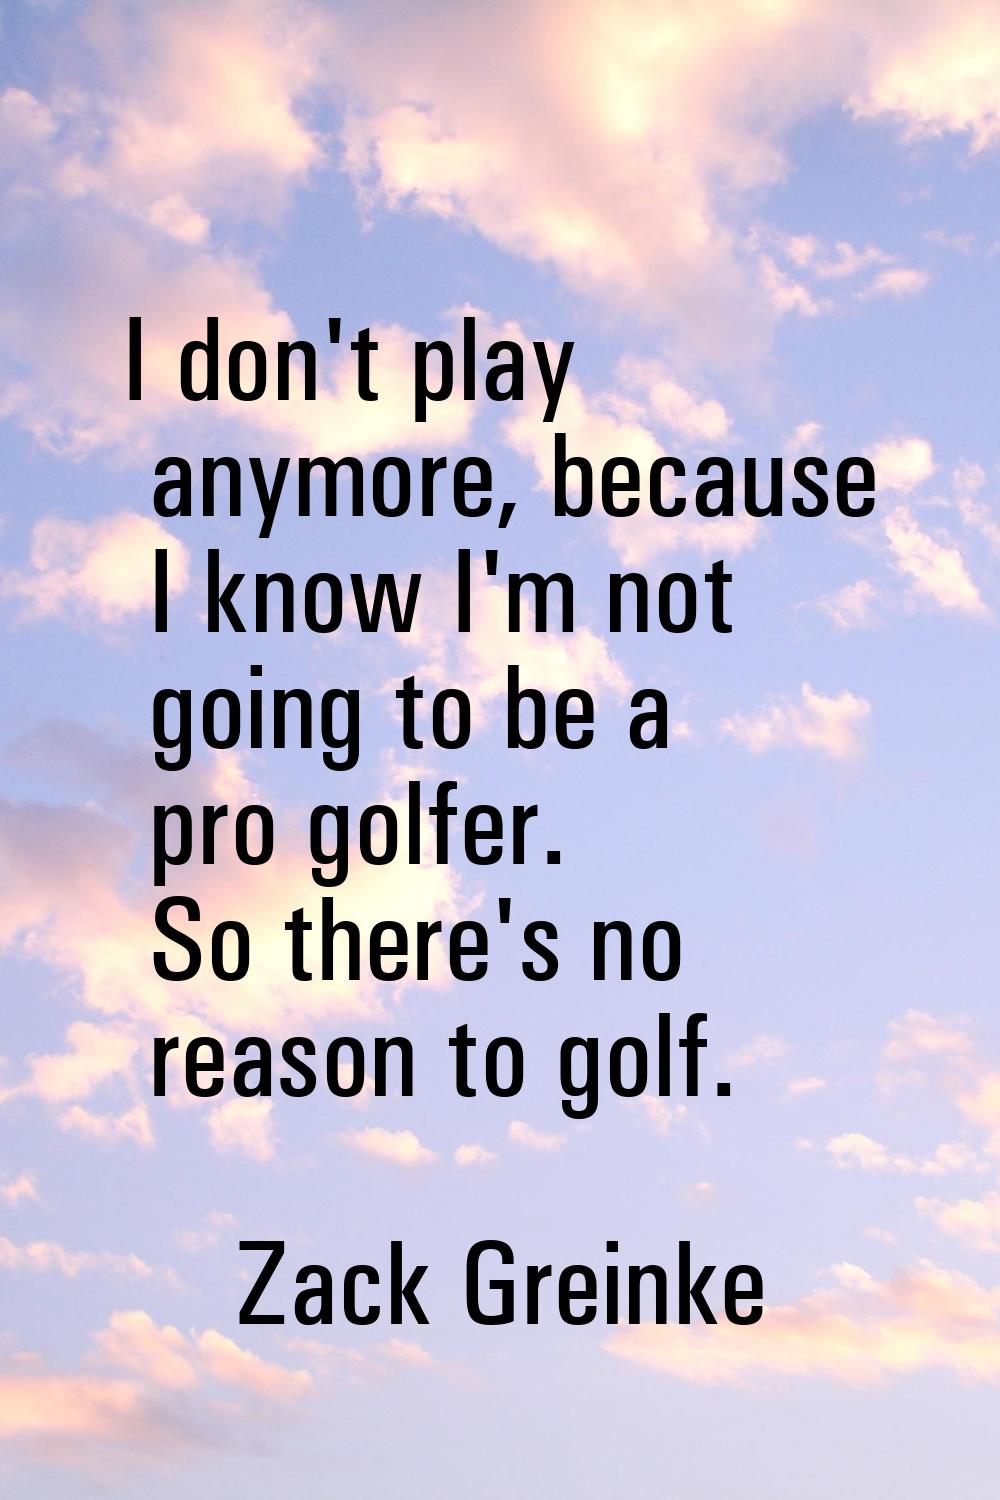 I don't play anymore, because I know I'm not going to be a pro golfer. So there's no reason to golf